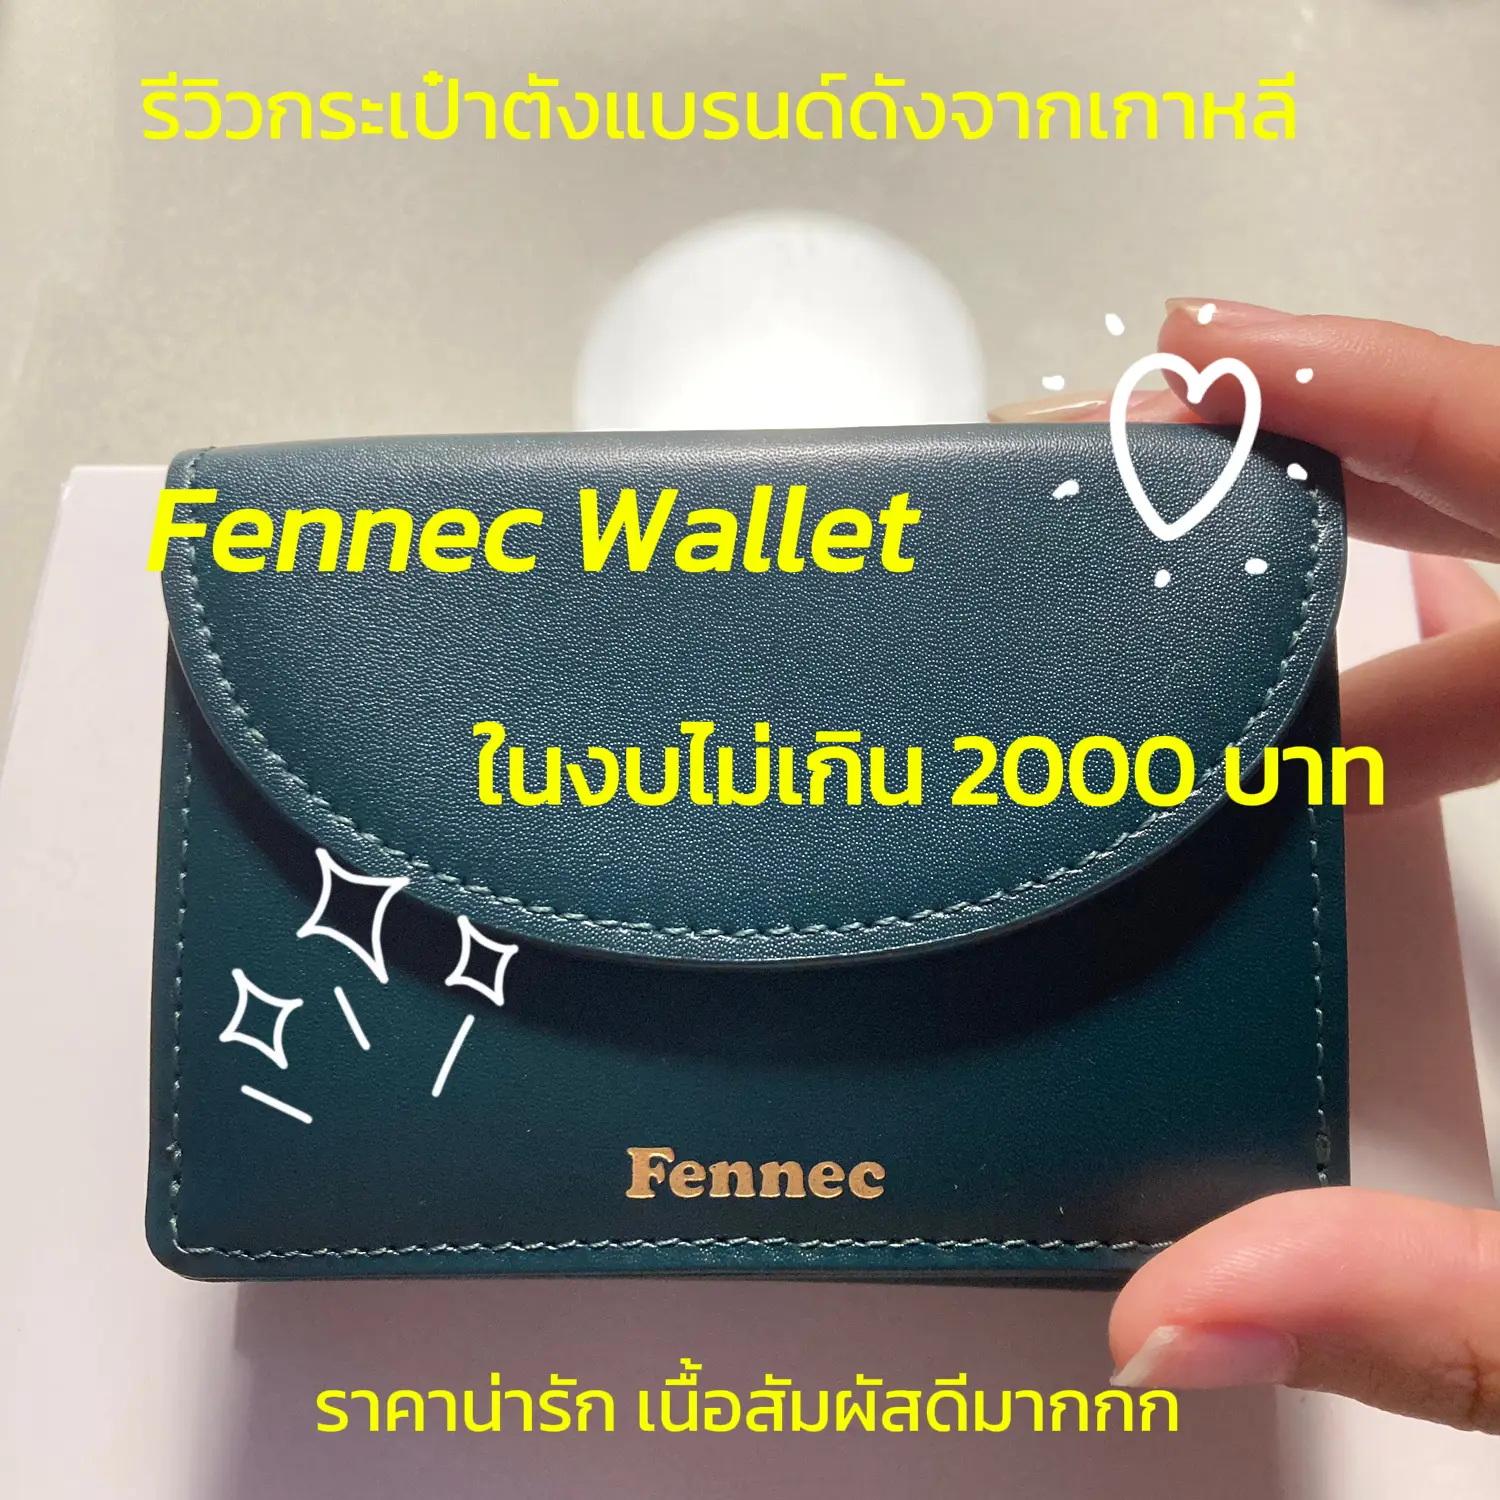 Fennec Reviews Famous Brand Purse From Korea🌷, Gallery posted by da1sy.nt